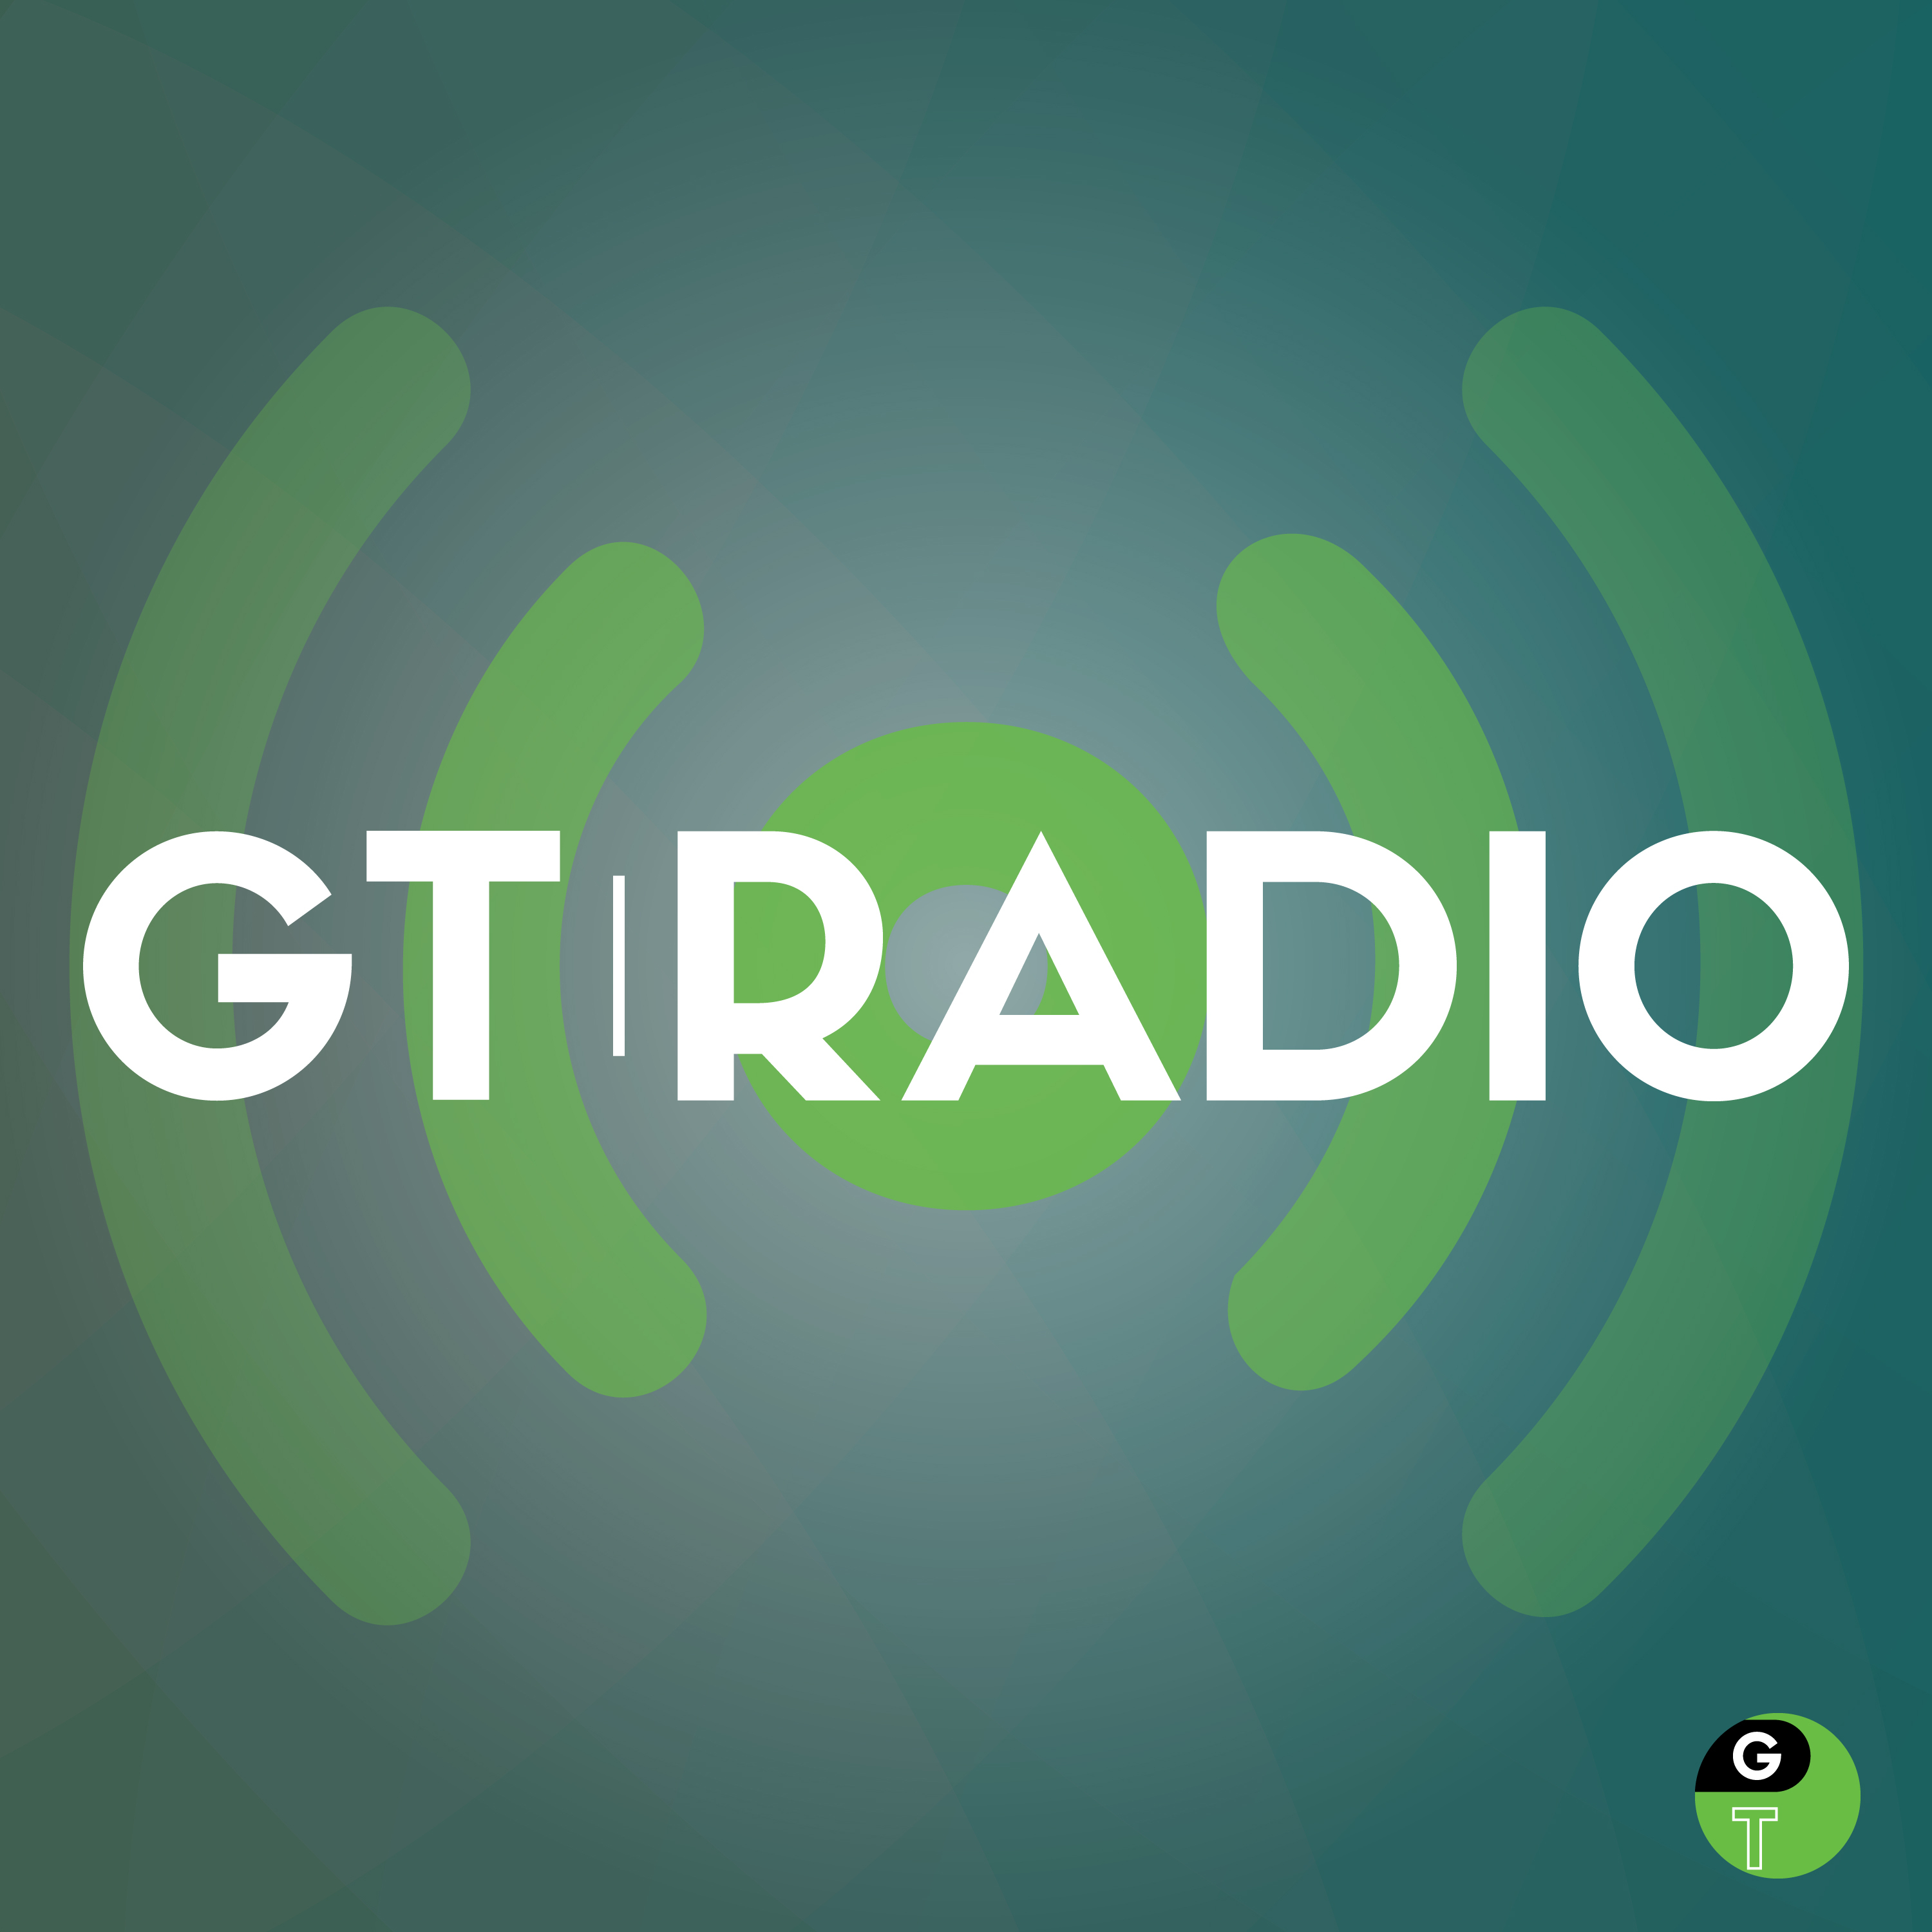 GT Radio - The Geek Therapy Podcast